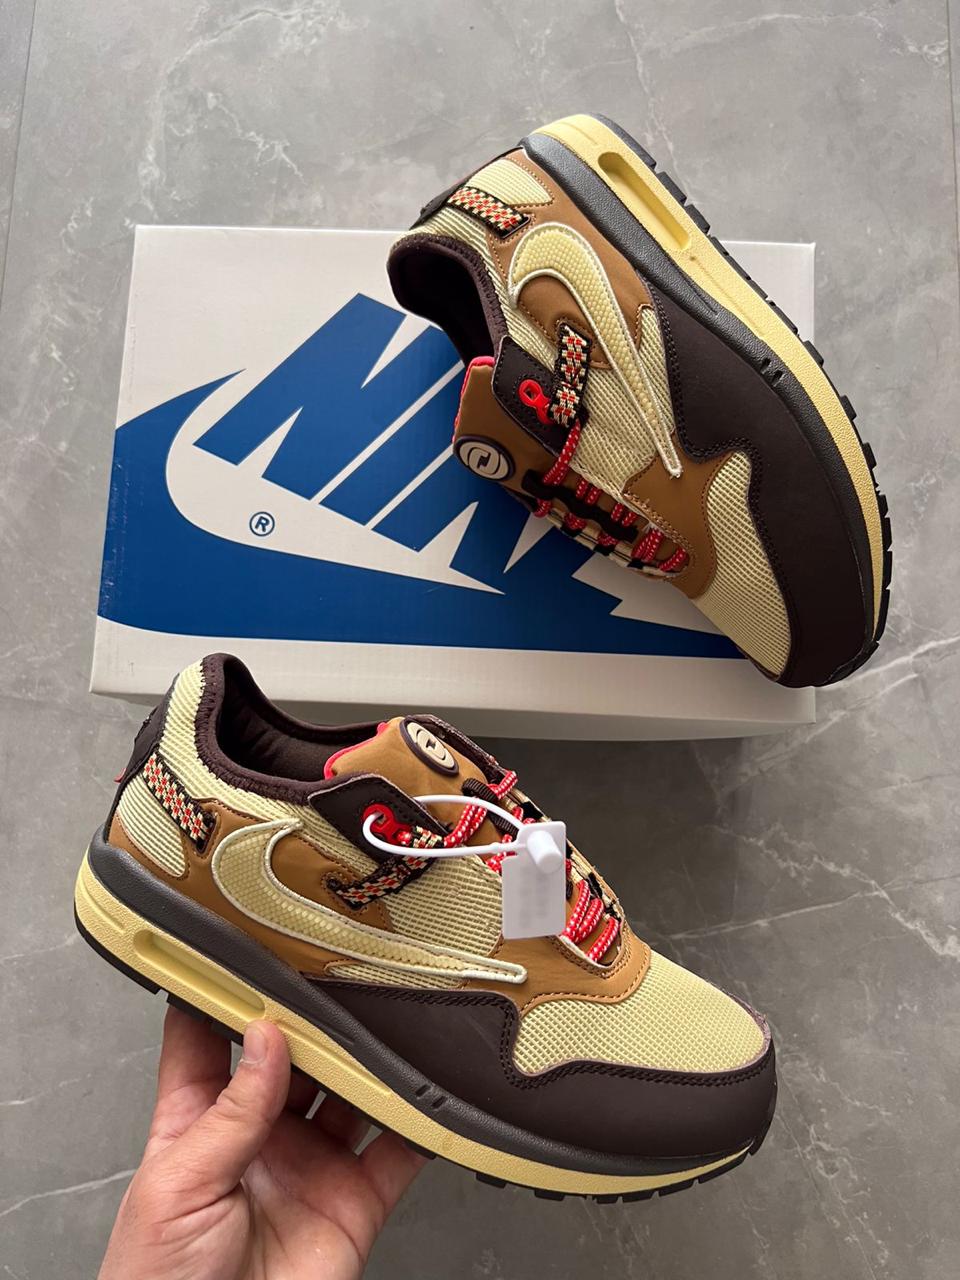 Travis Scott Sneakers Air Max Imported